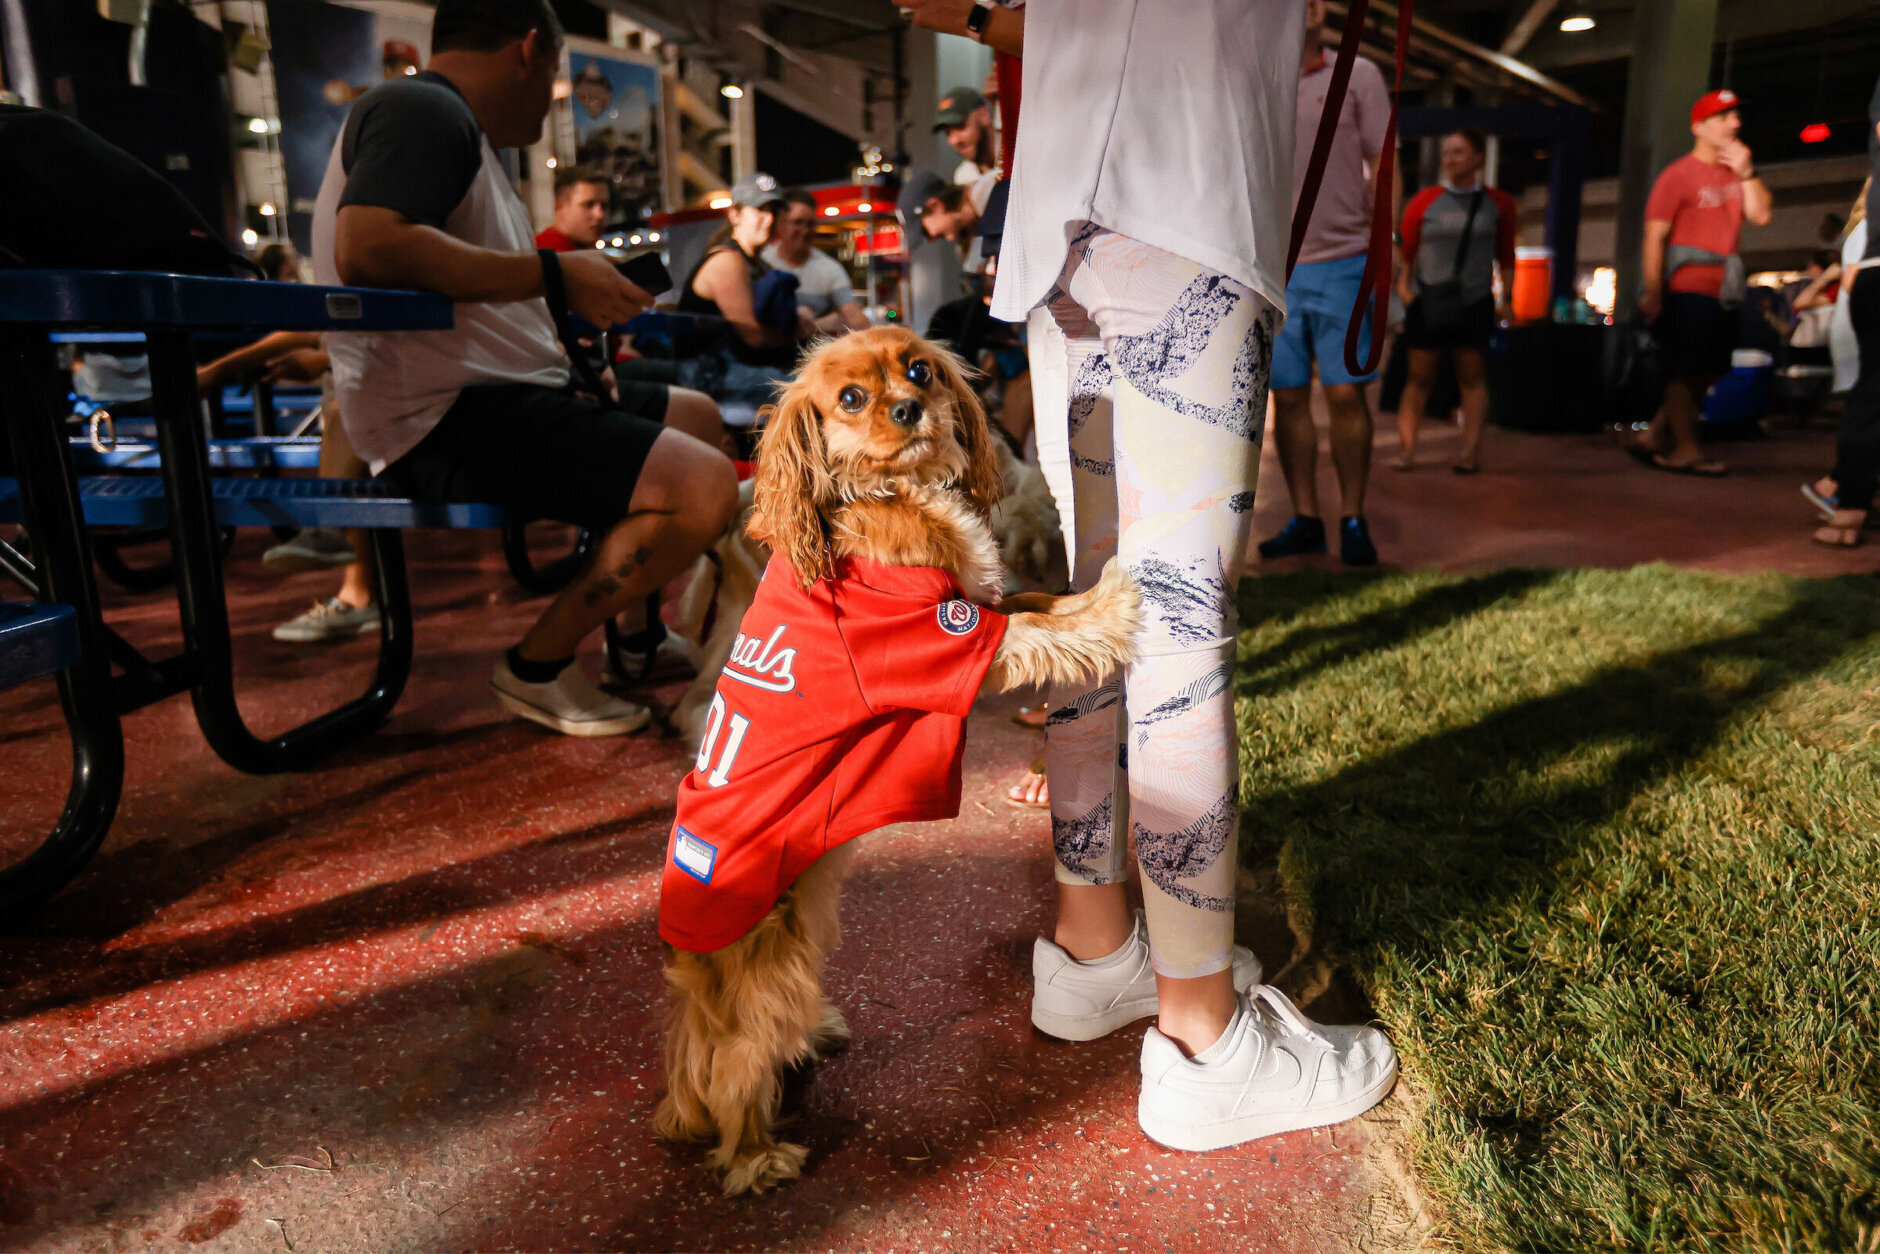 Hot dog! Nationals bring back Pups in the Park WTOP News